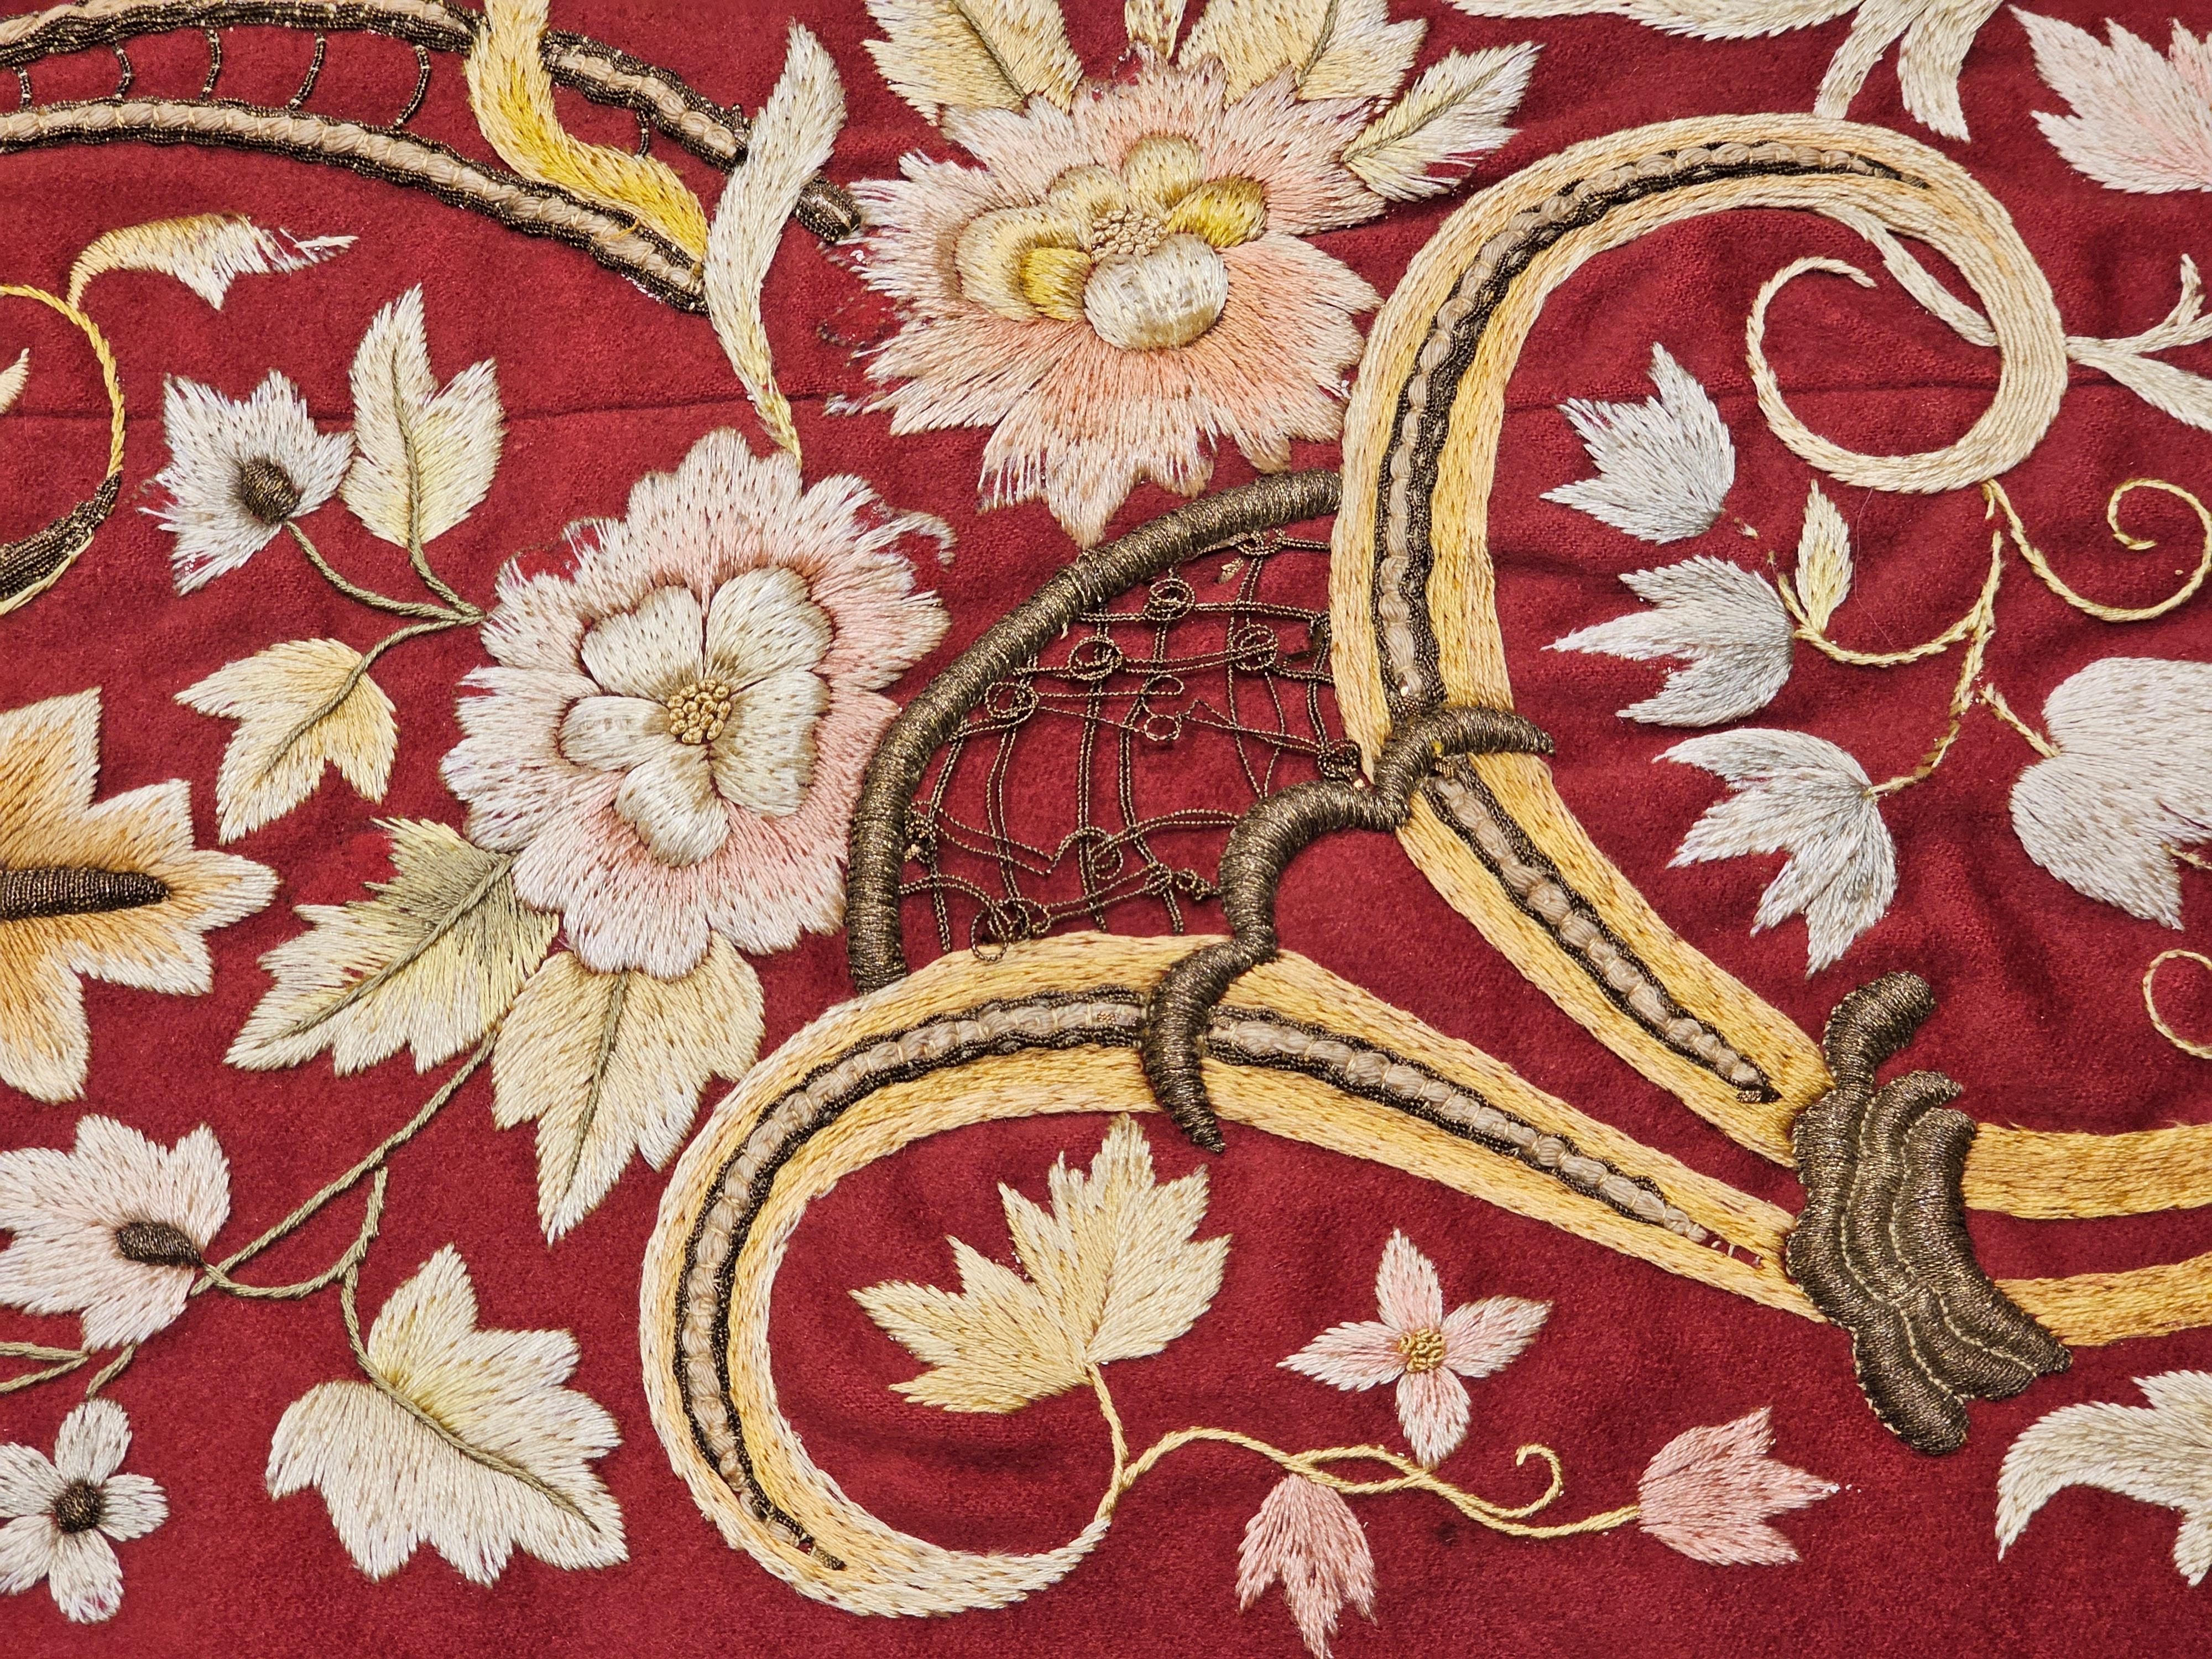 Gold 19th Century Ottoman Hand Embroidered Silk and Gilt Threads Tapestry Textile For Sale